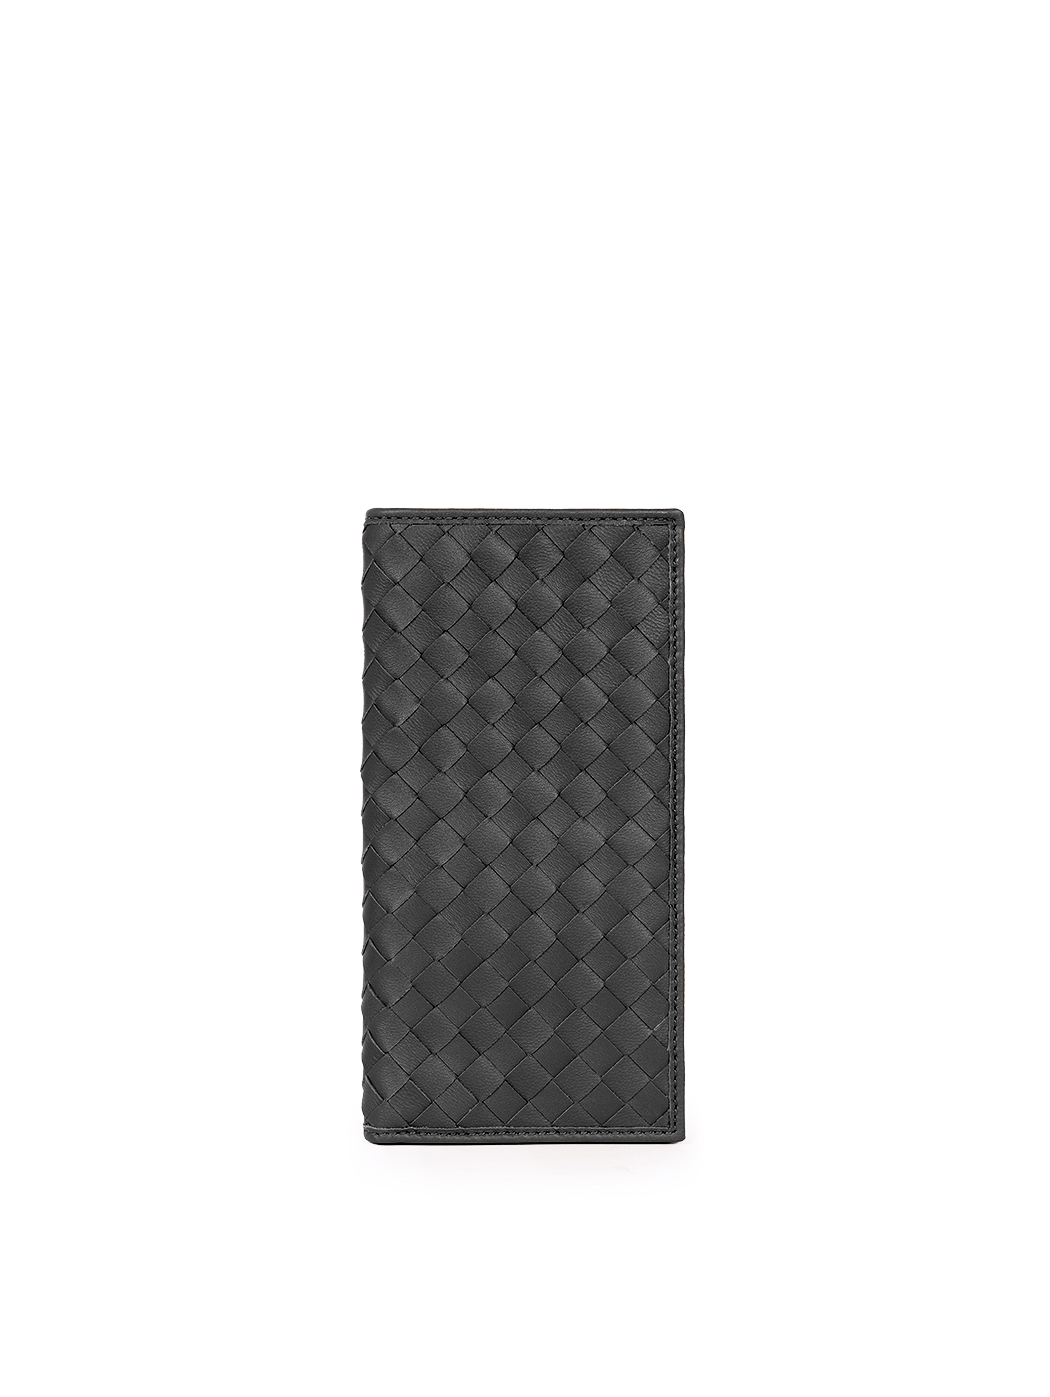 Long wallet with card holder in black woven leather